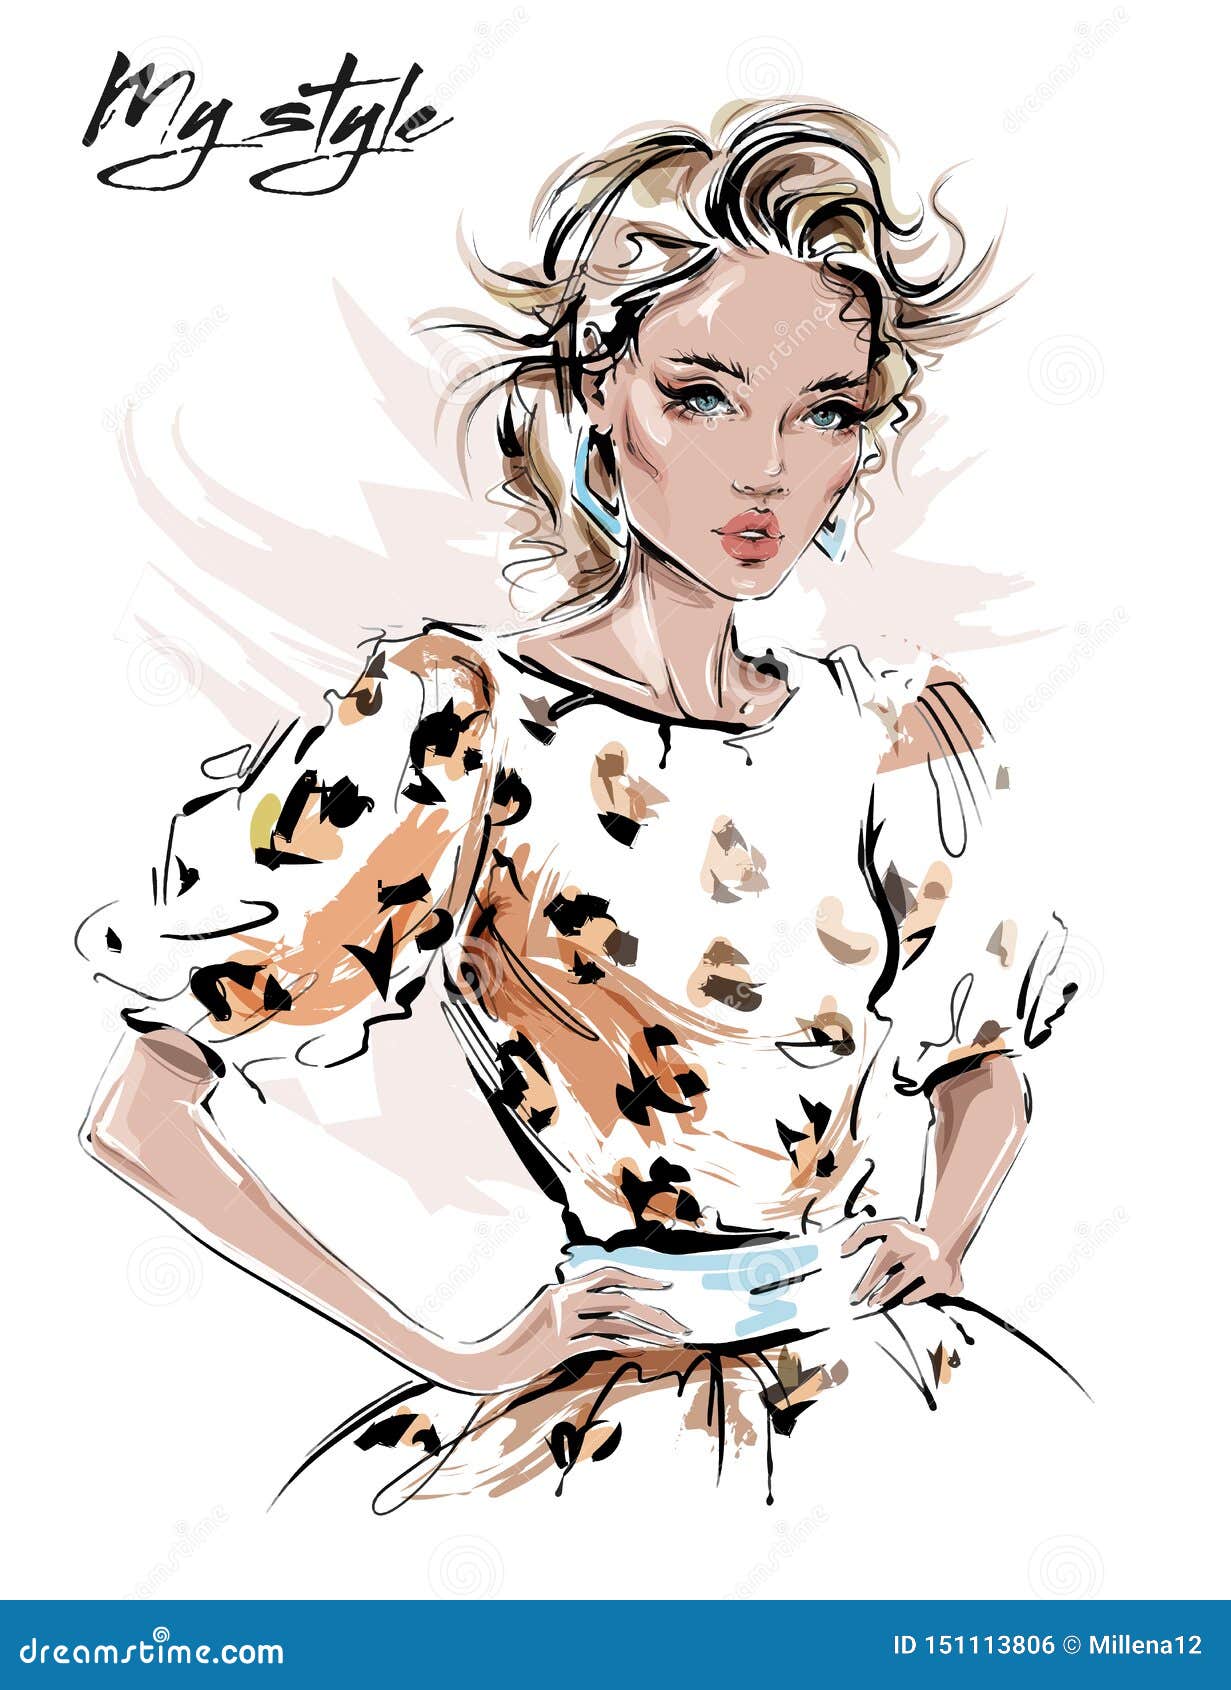 https://thumbs.dreamstime.com/z/hand-drawn-beautiful-young-woman-dress-leopard-print-stylish-girl-fashion-look-sketch-vector-illustration-151113806.jpg